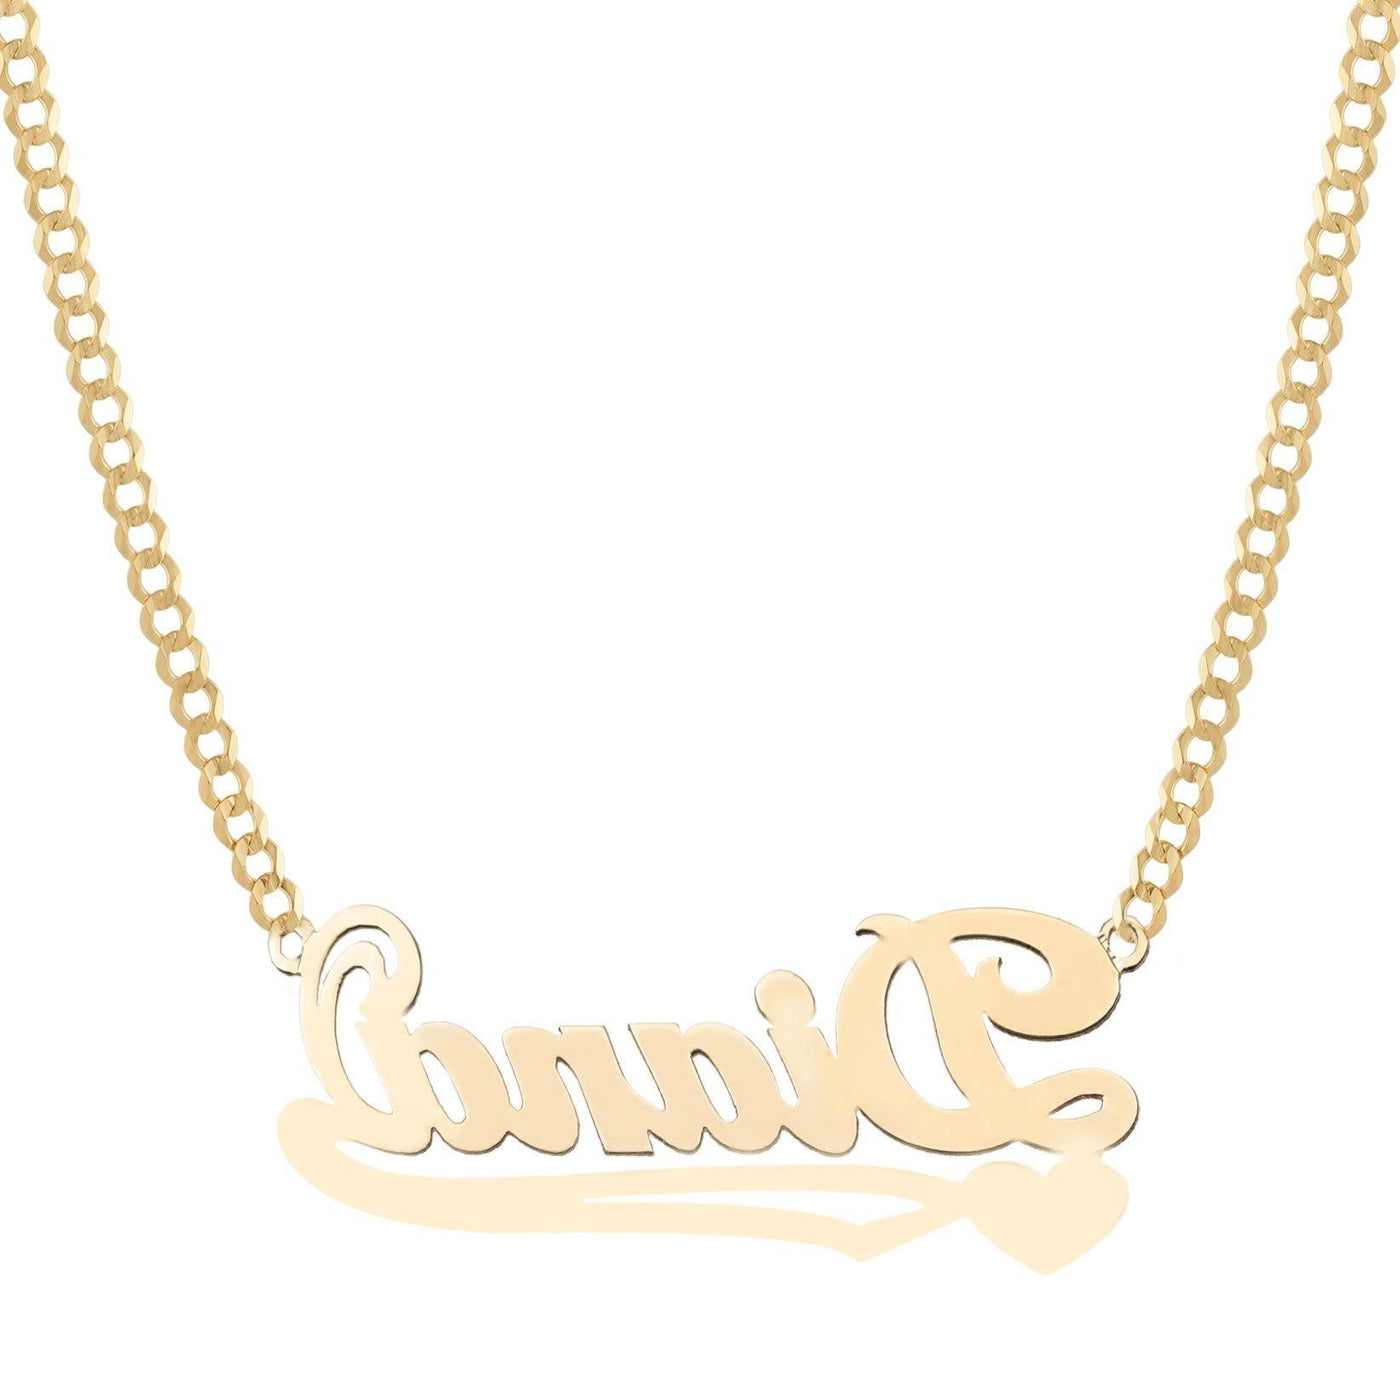 Ladies Script Name Plate Heart Necklace 14K Gold - Style 107 - bayamjewelry